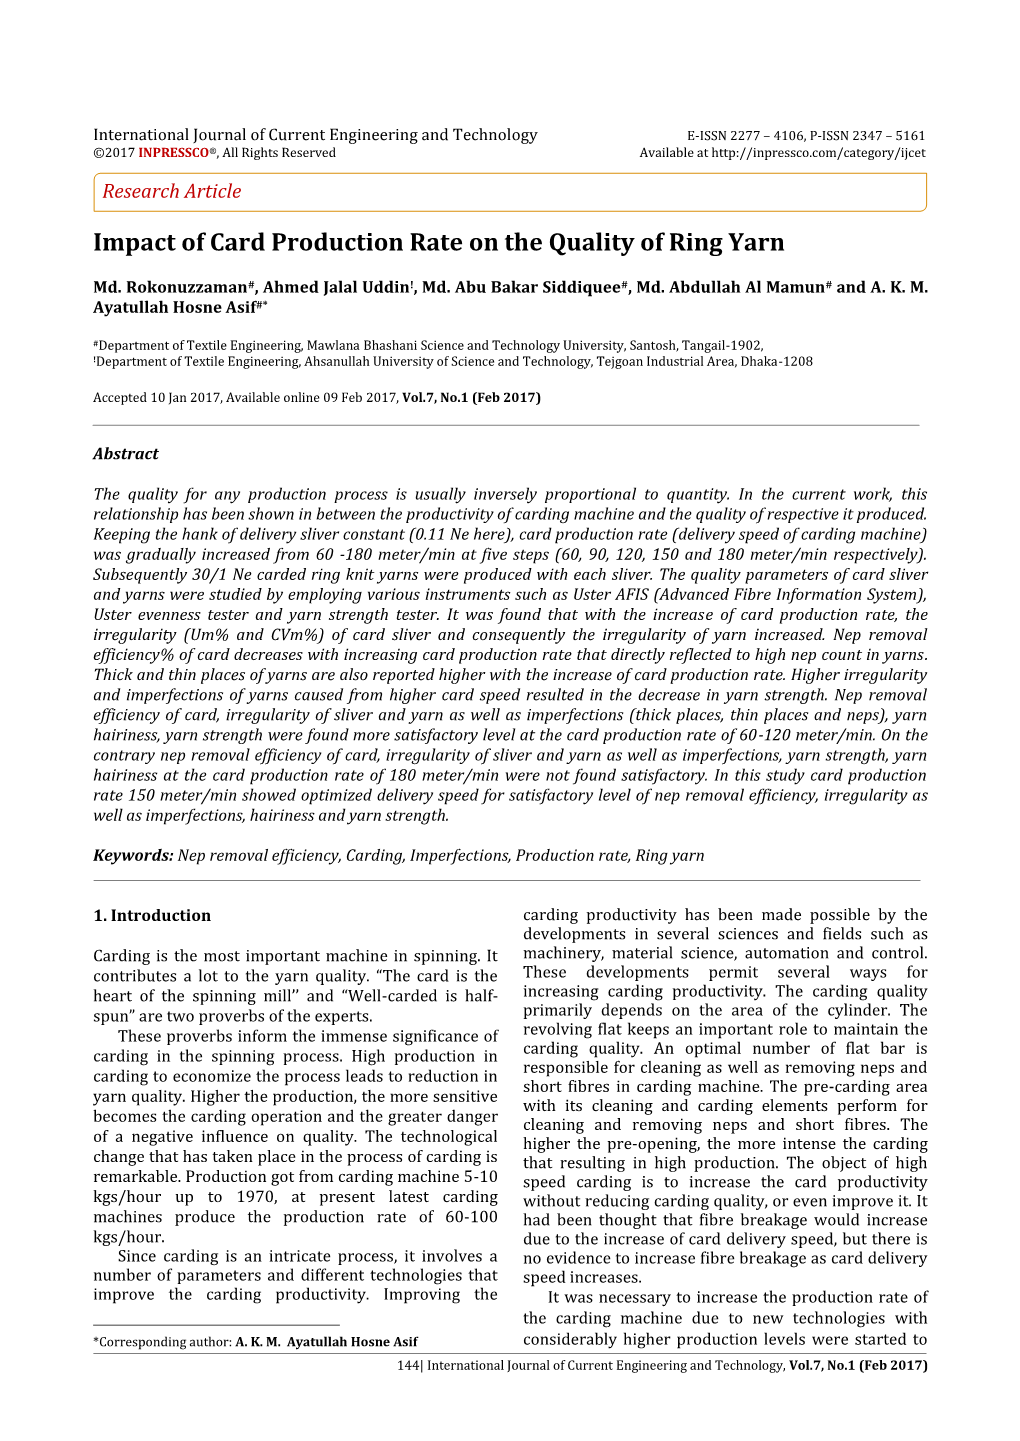 Impact of Card Production Rate on the Quality of Ring Yarn